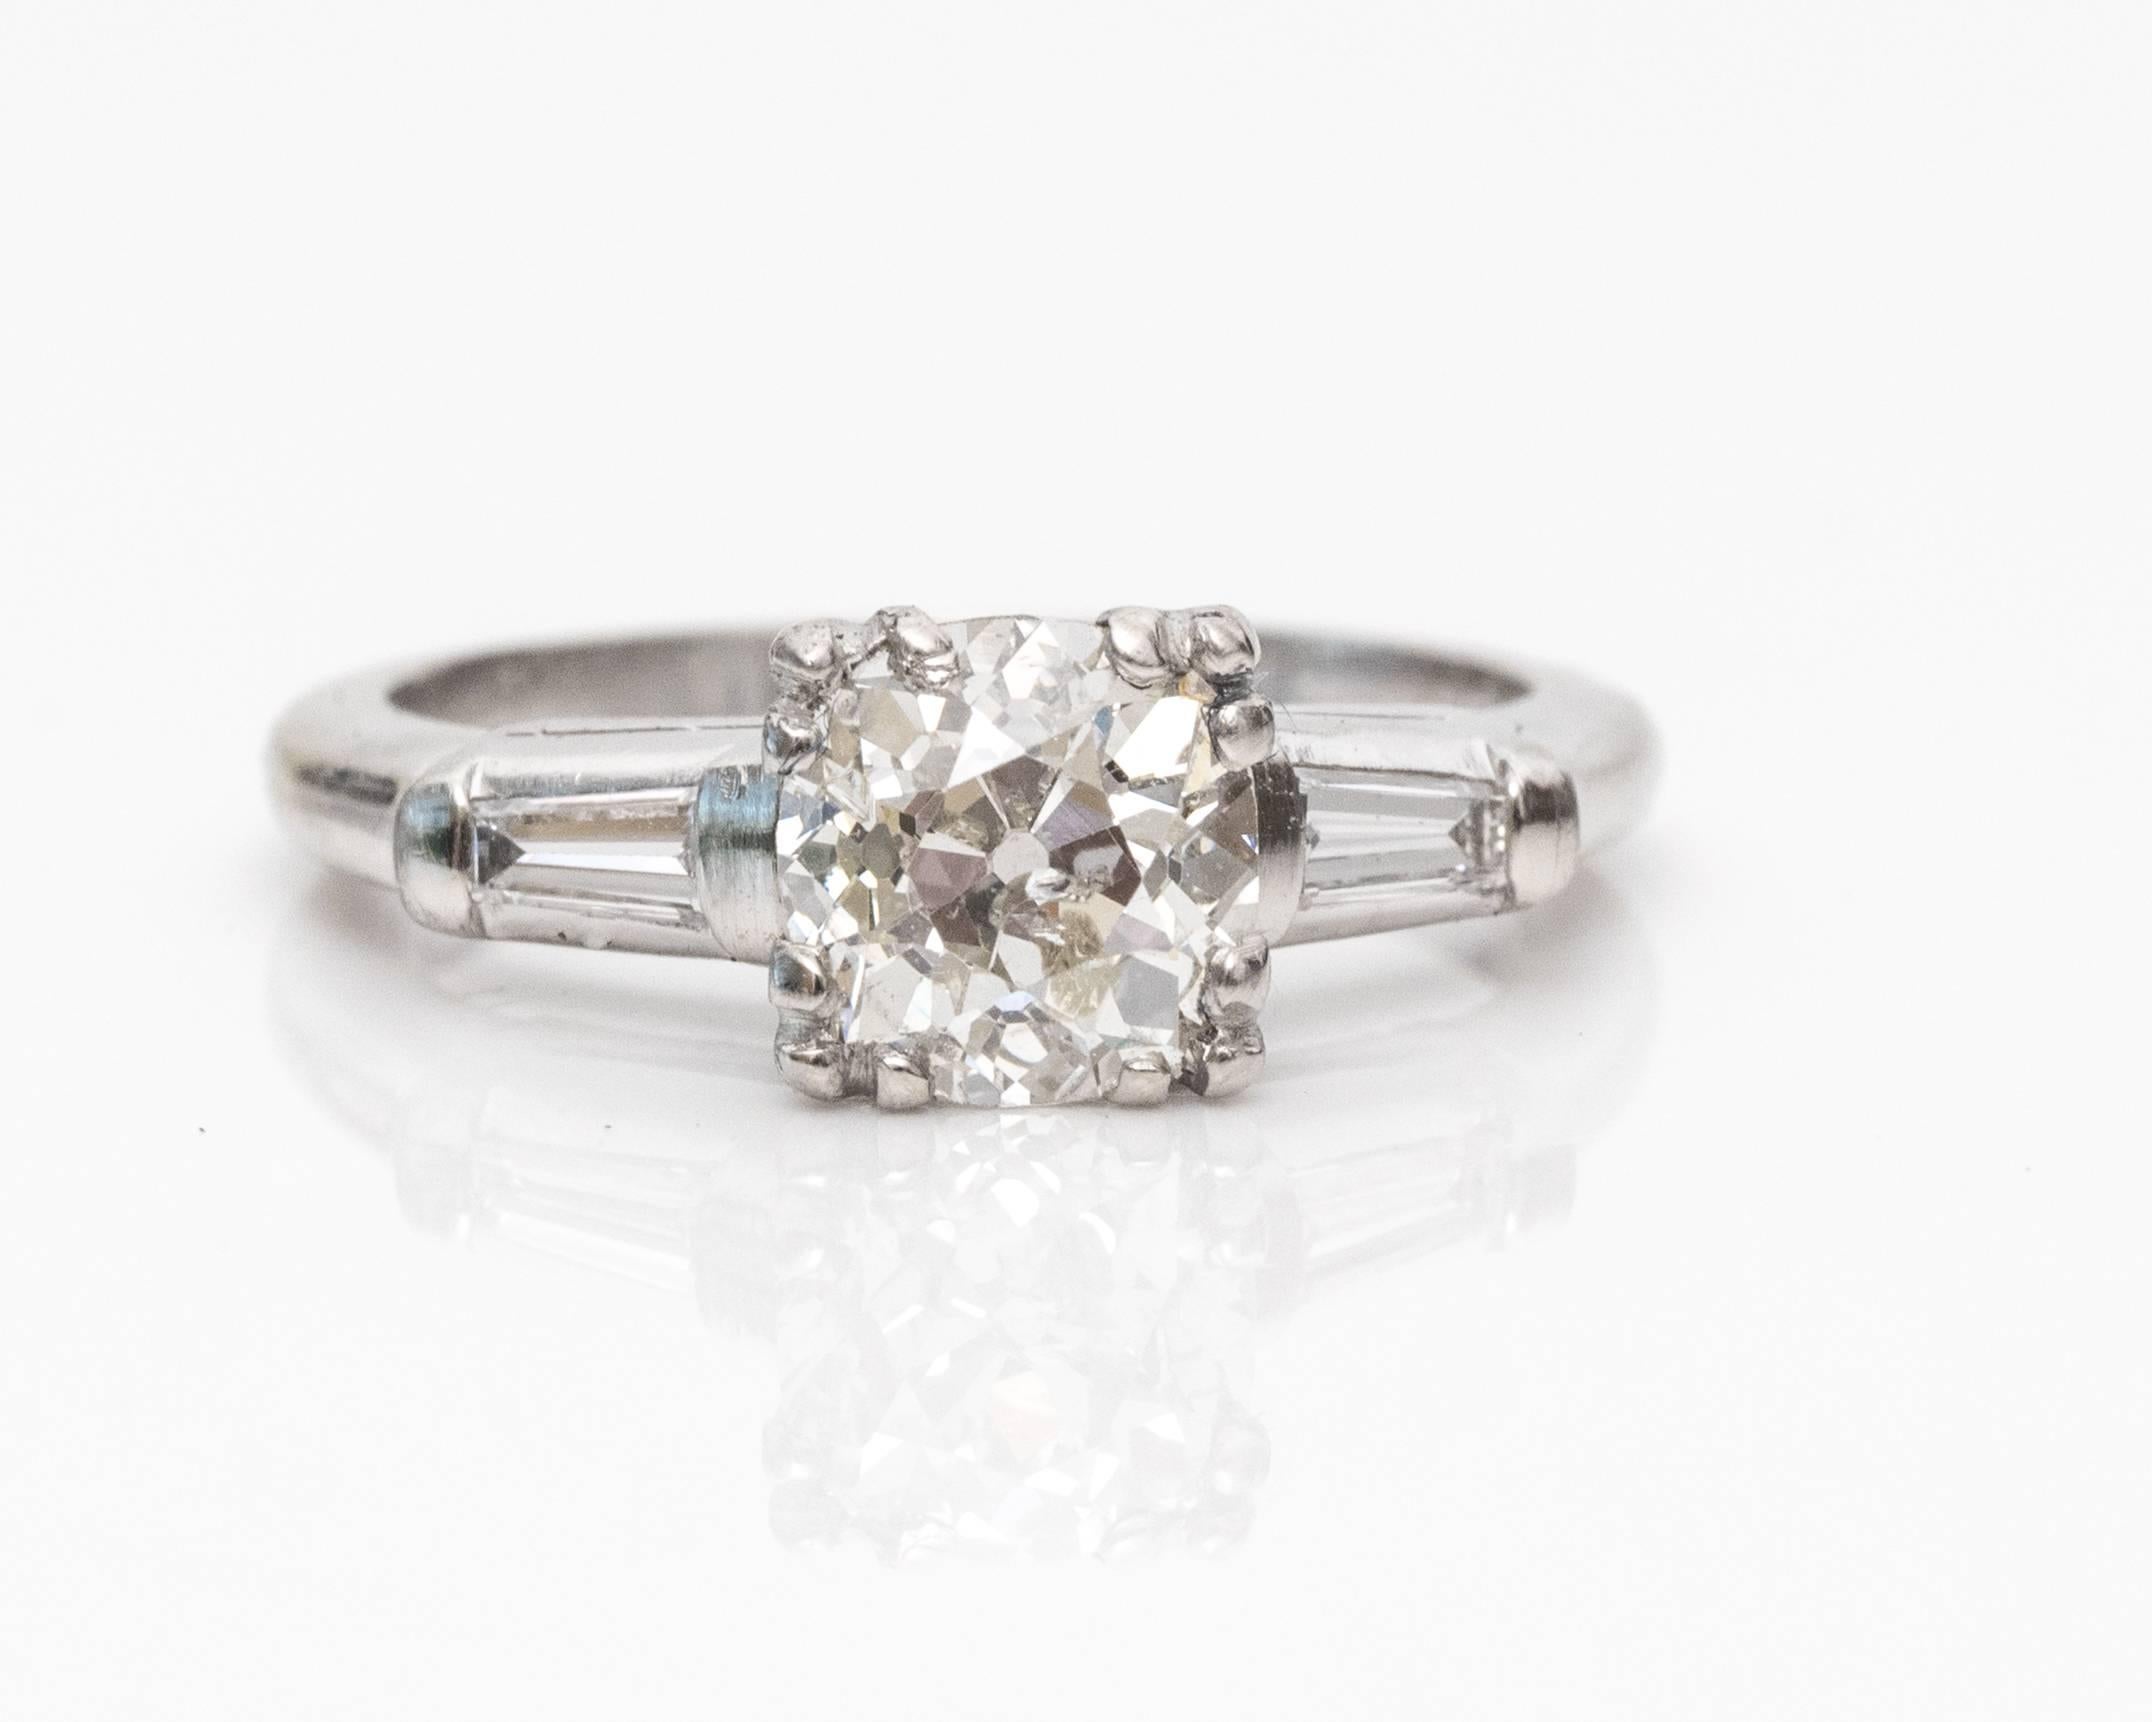 1920s Art Deco 1.14 Carat GIA Certified Diamond Platinum Engagement Ring. This ring shines with simplicity and sophistication. The timeless style will last through the ages, just as it already has! This 1920s ring has a GIA certified center diamond